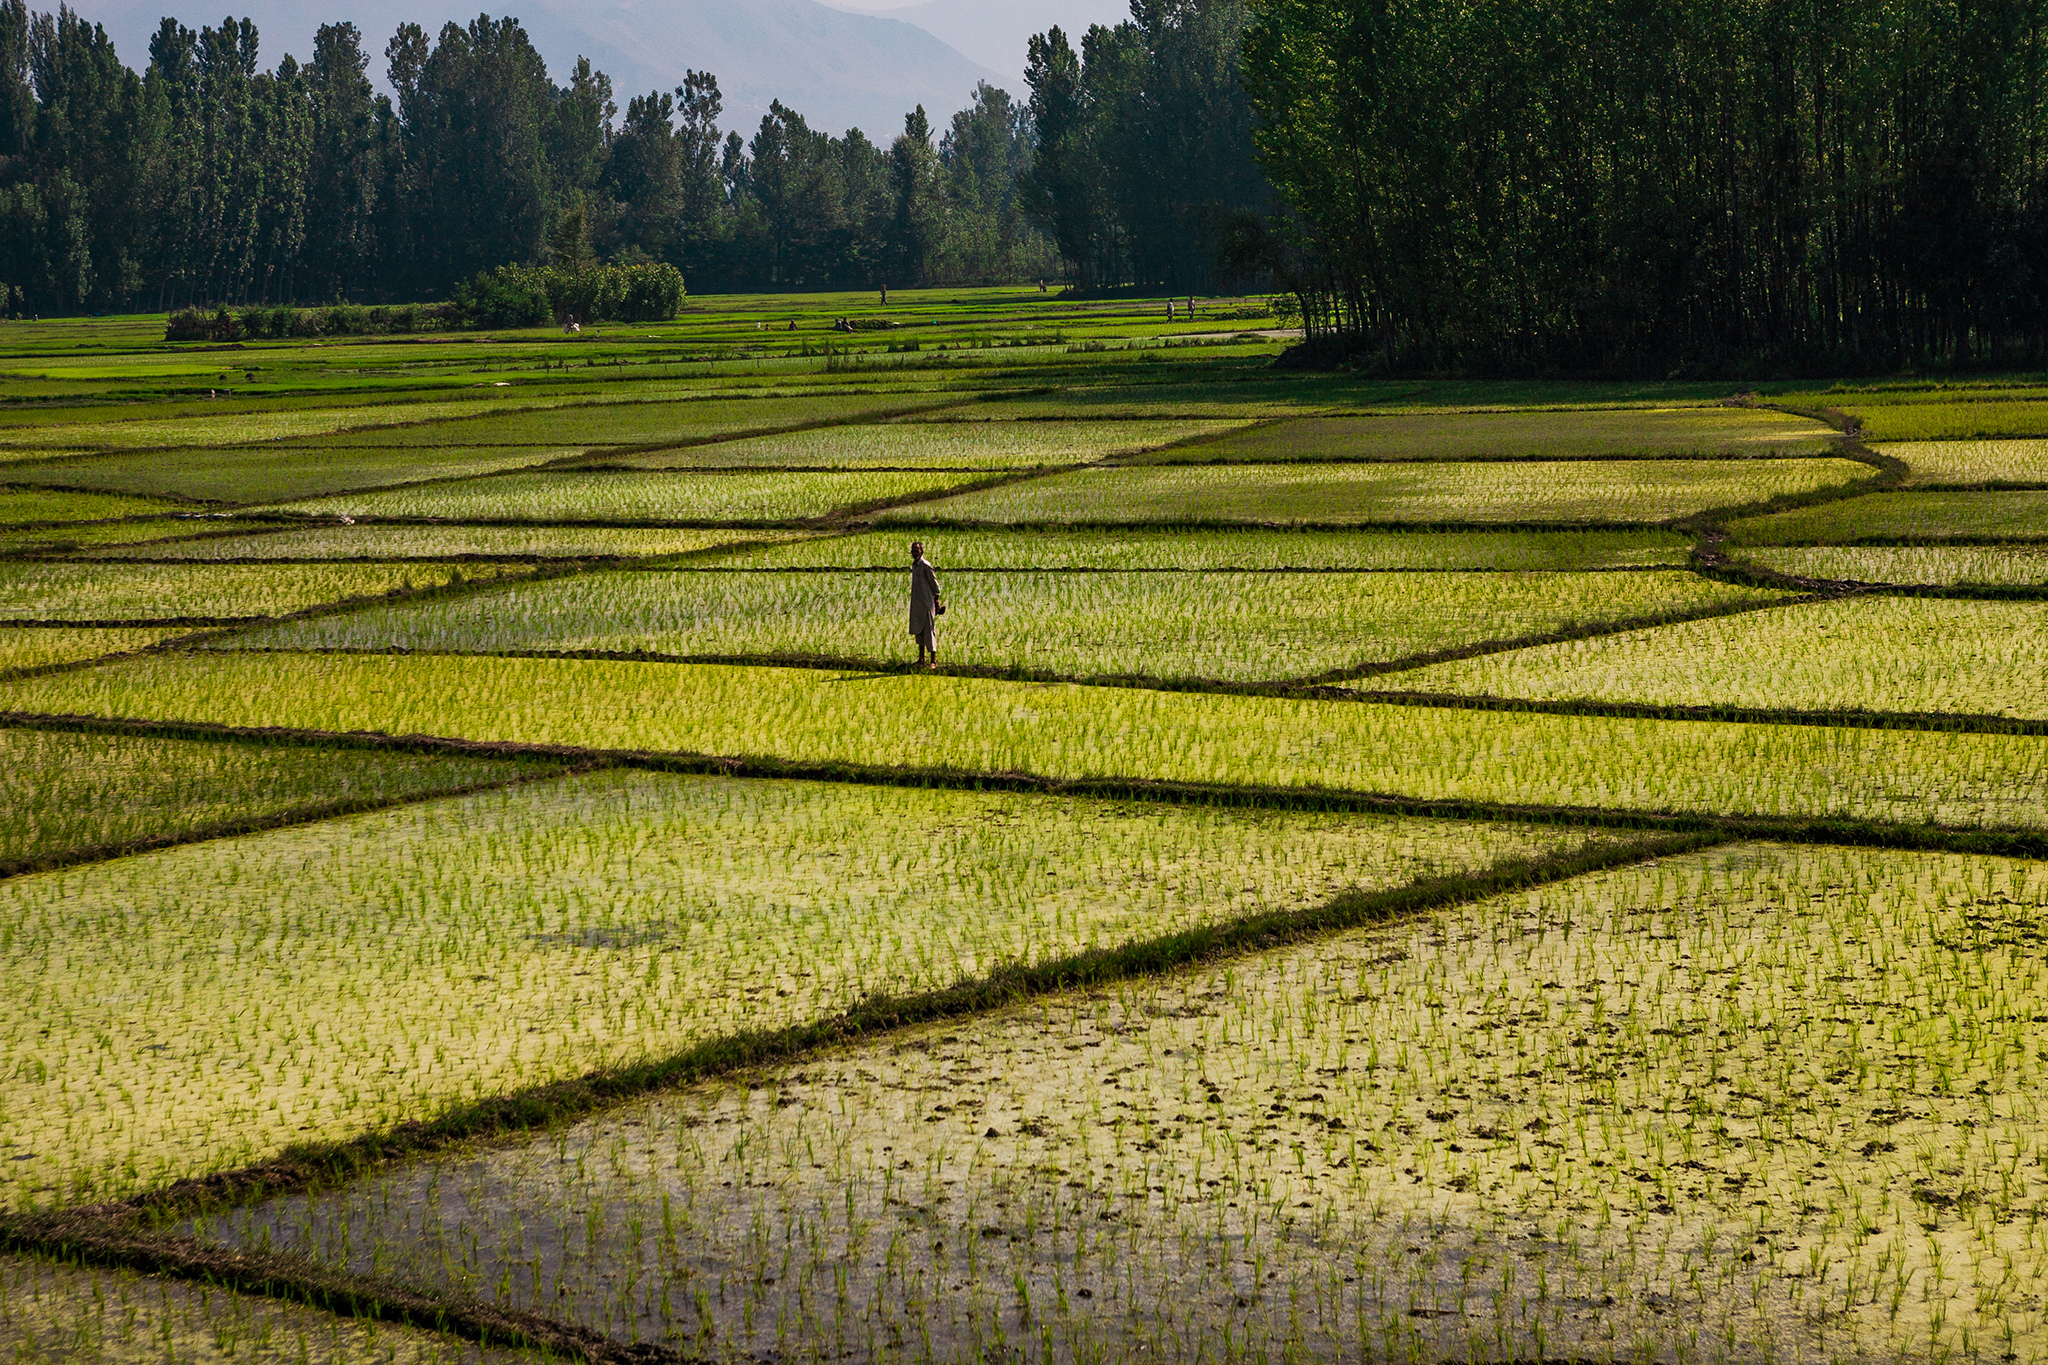 The use of standing water to grow rice in India and Pakistan leads to large water loss [image by sandeepachethan/Flickr]